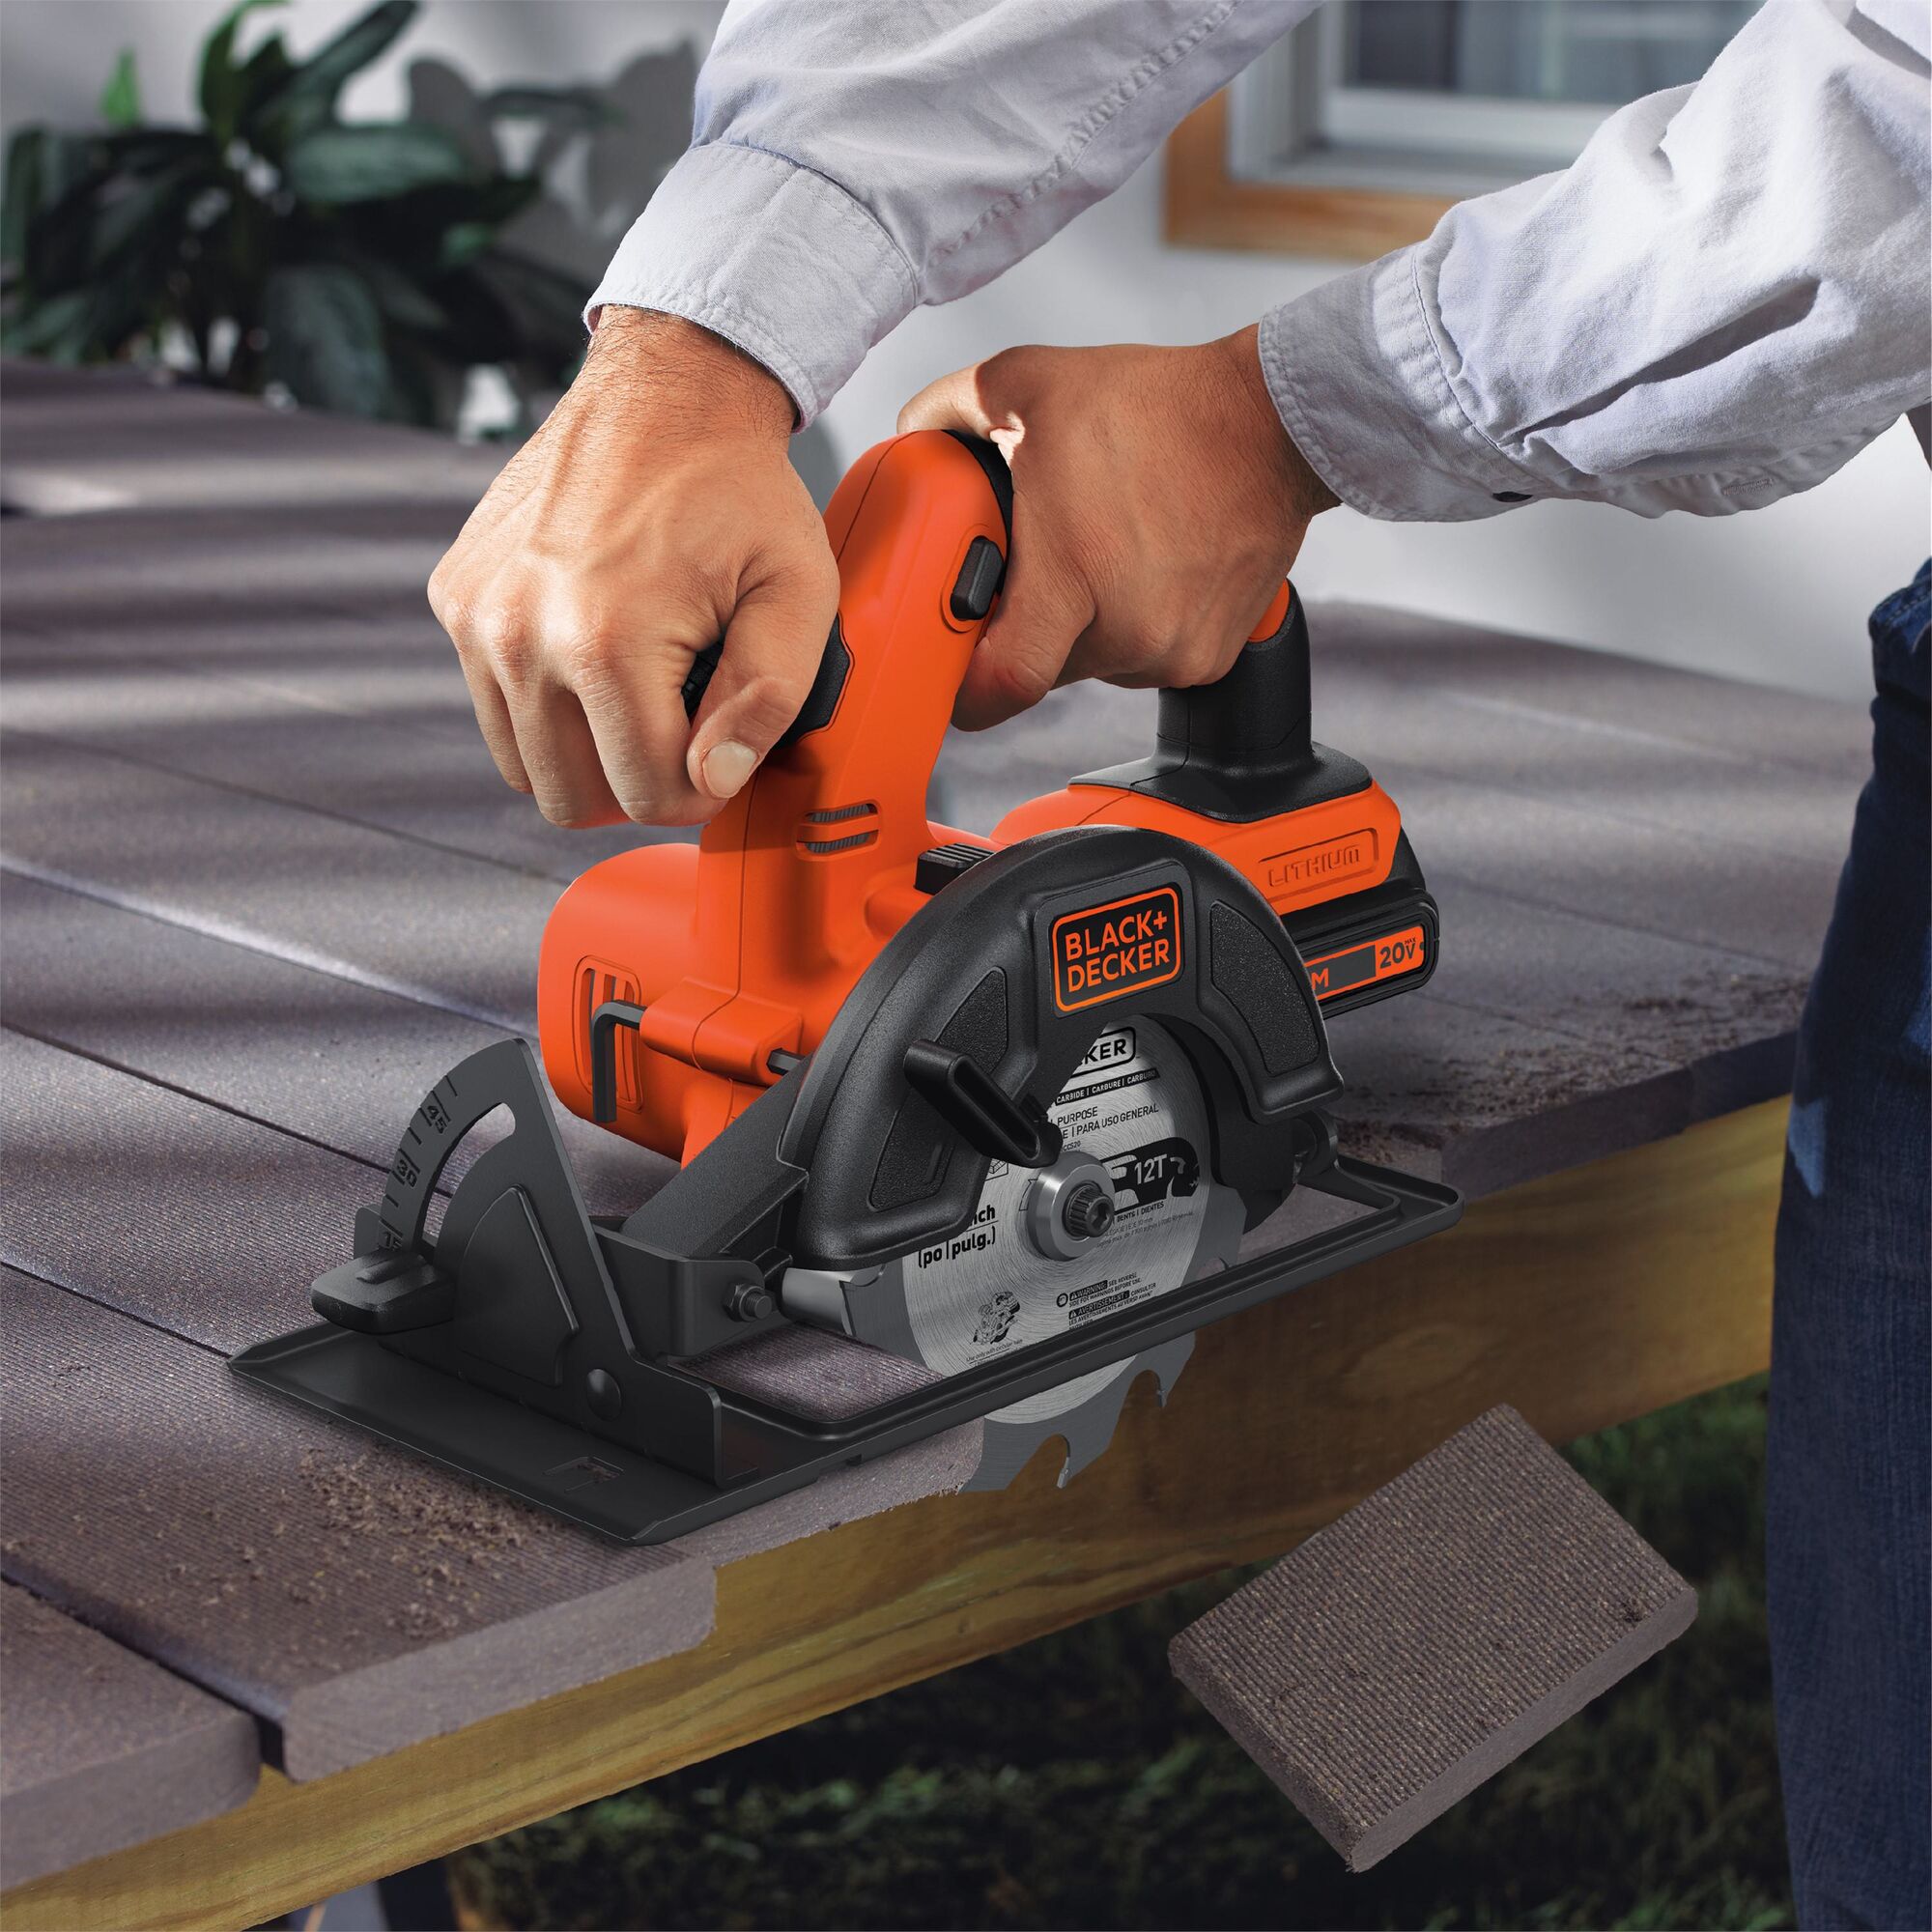 20 volt max Powerconnect cirtular saw being used by a person to cut hard material